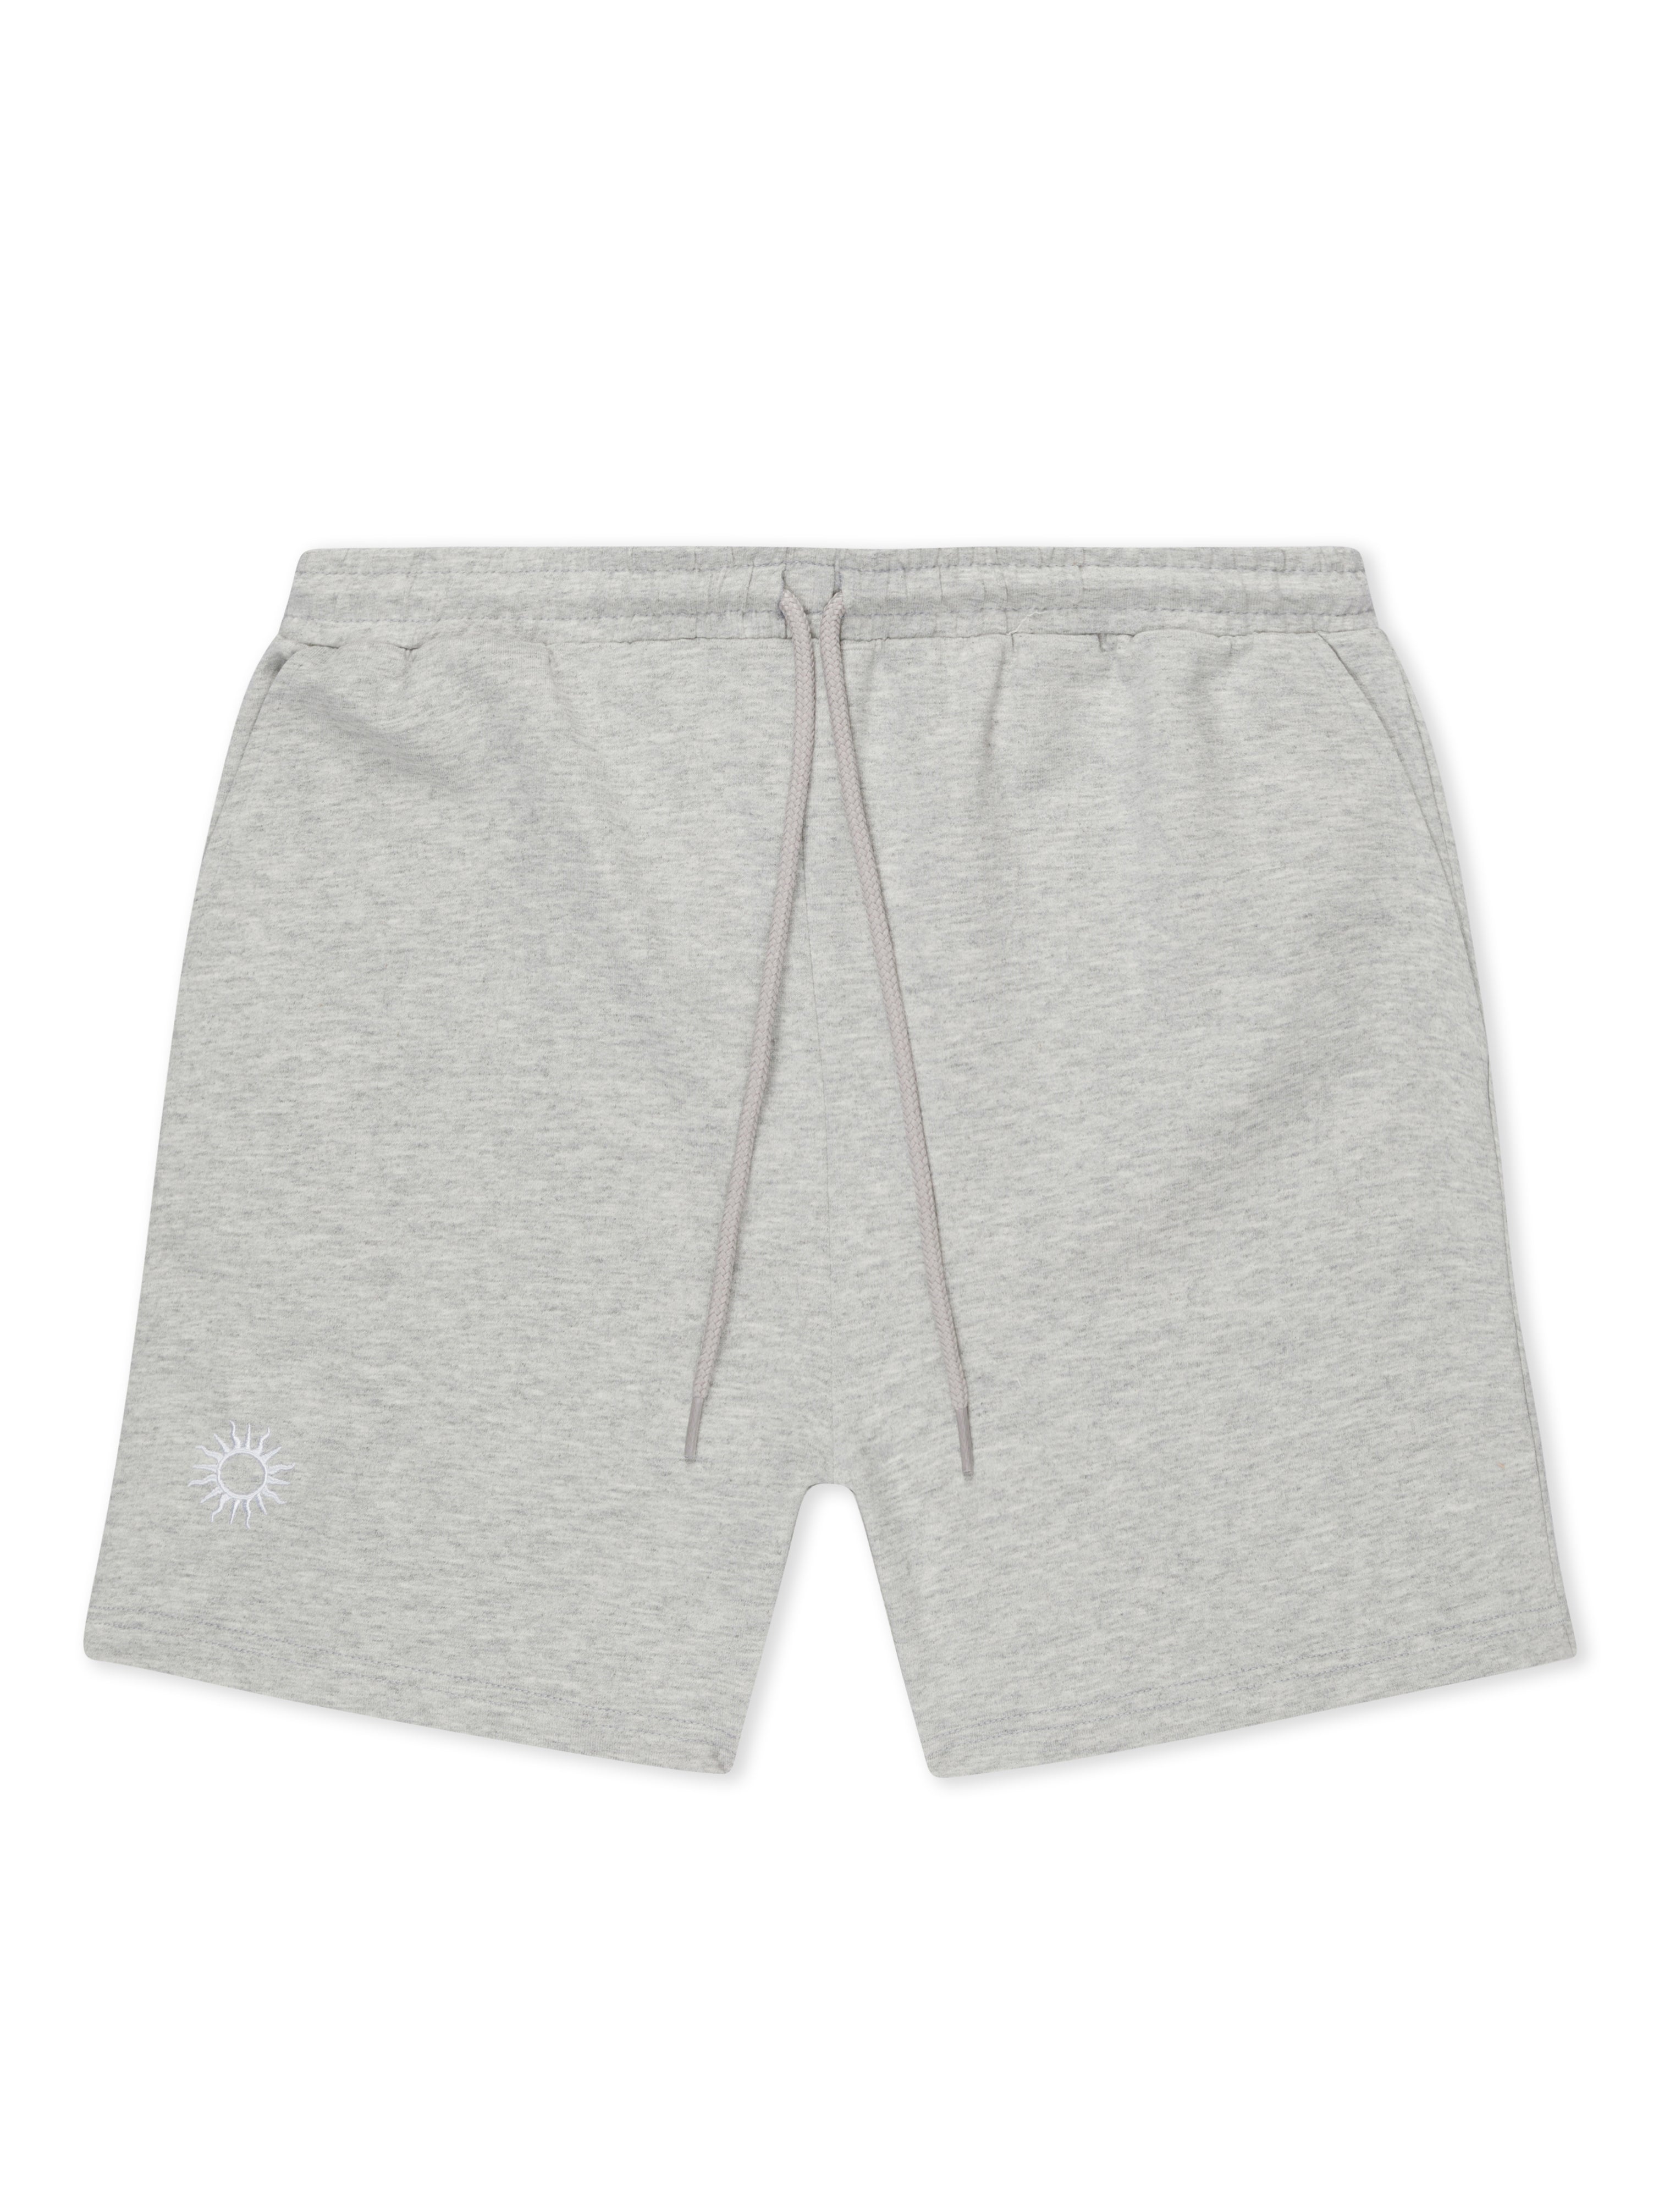 grey cotton retro gym shorts with small sun embroidered on left leg